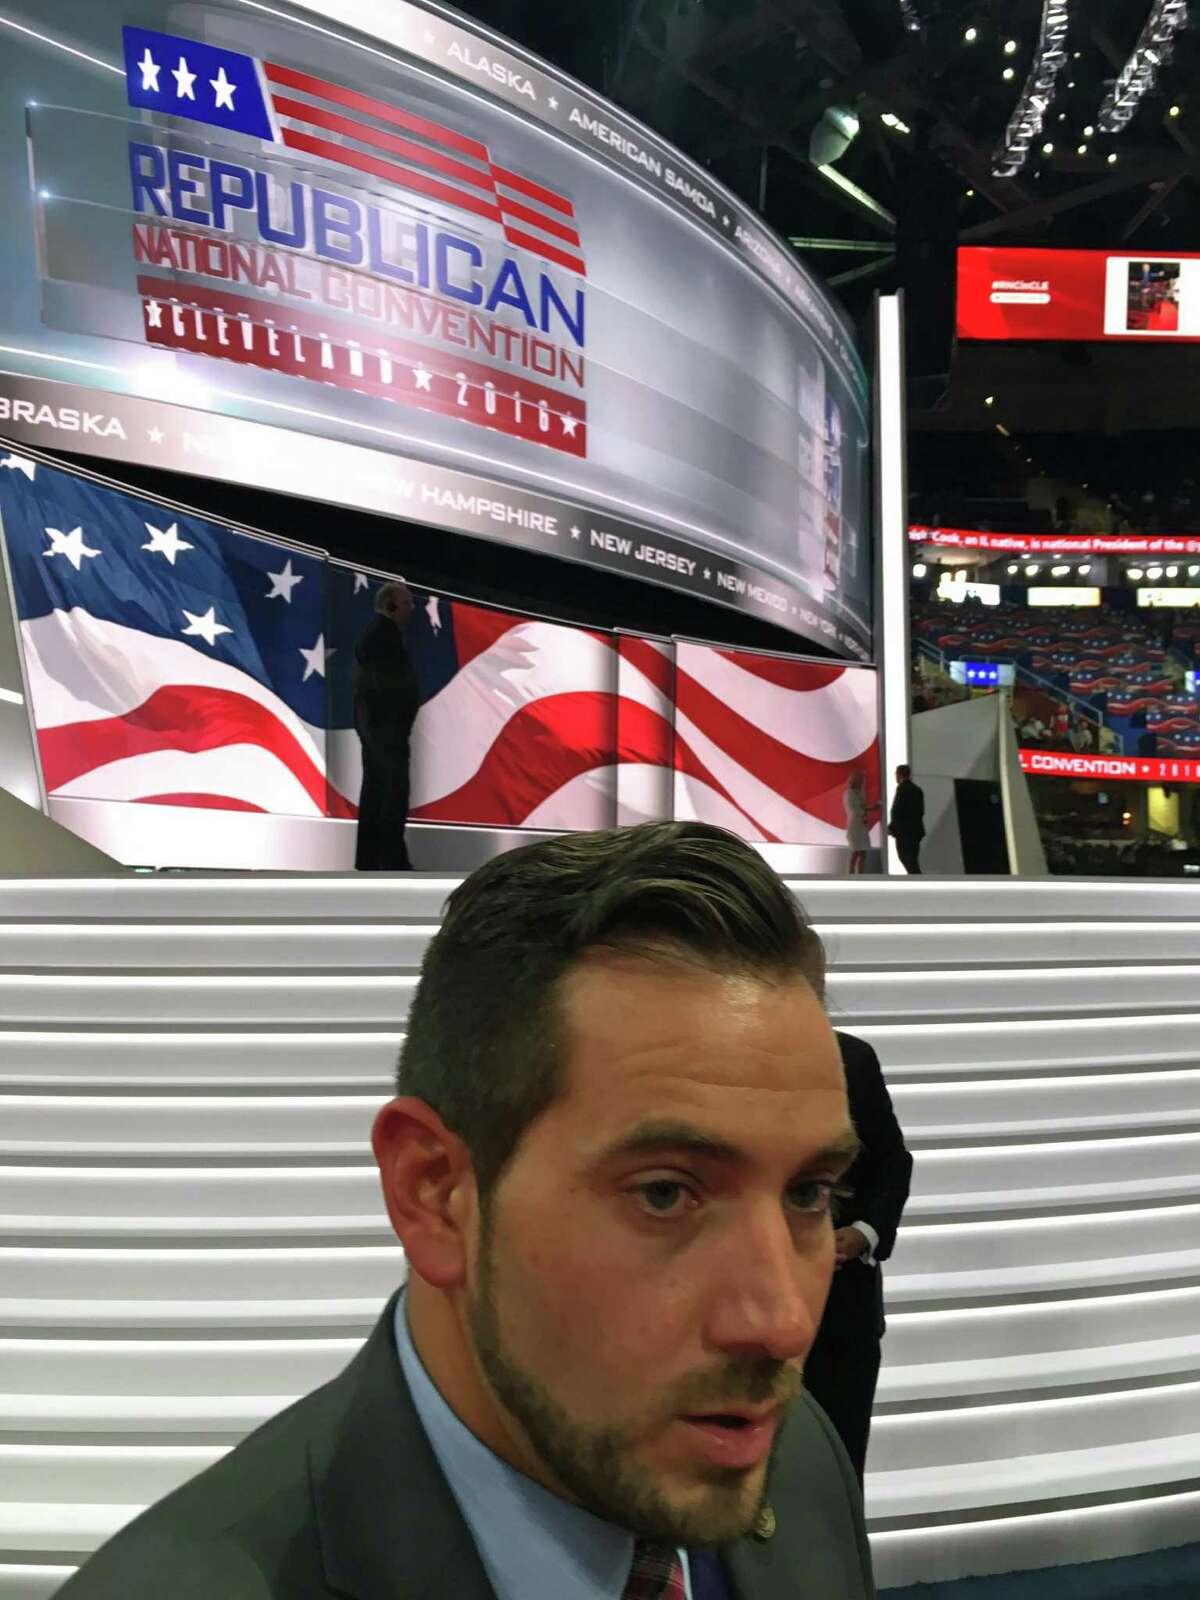 State GOP Chairman J.R. Romano is shown at the Republican National Convention in Cleveland on Monday, July 18, 2016.